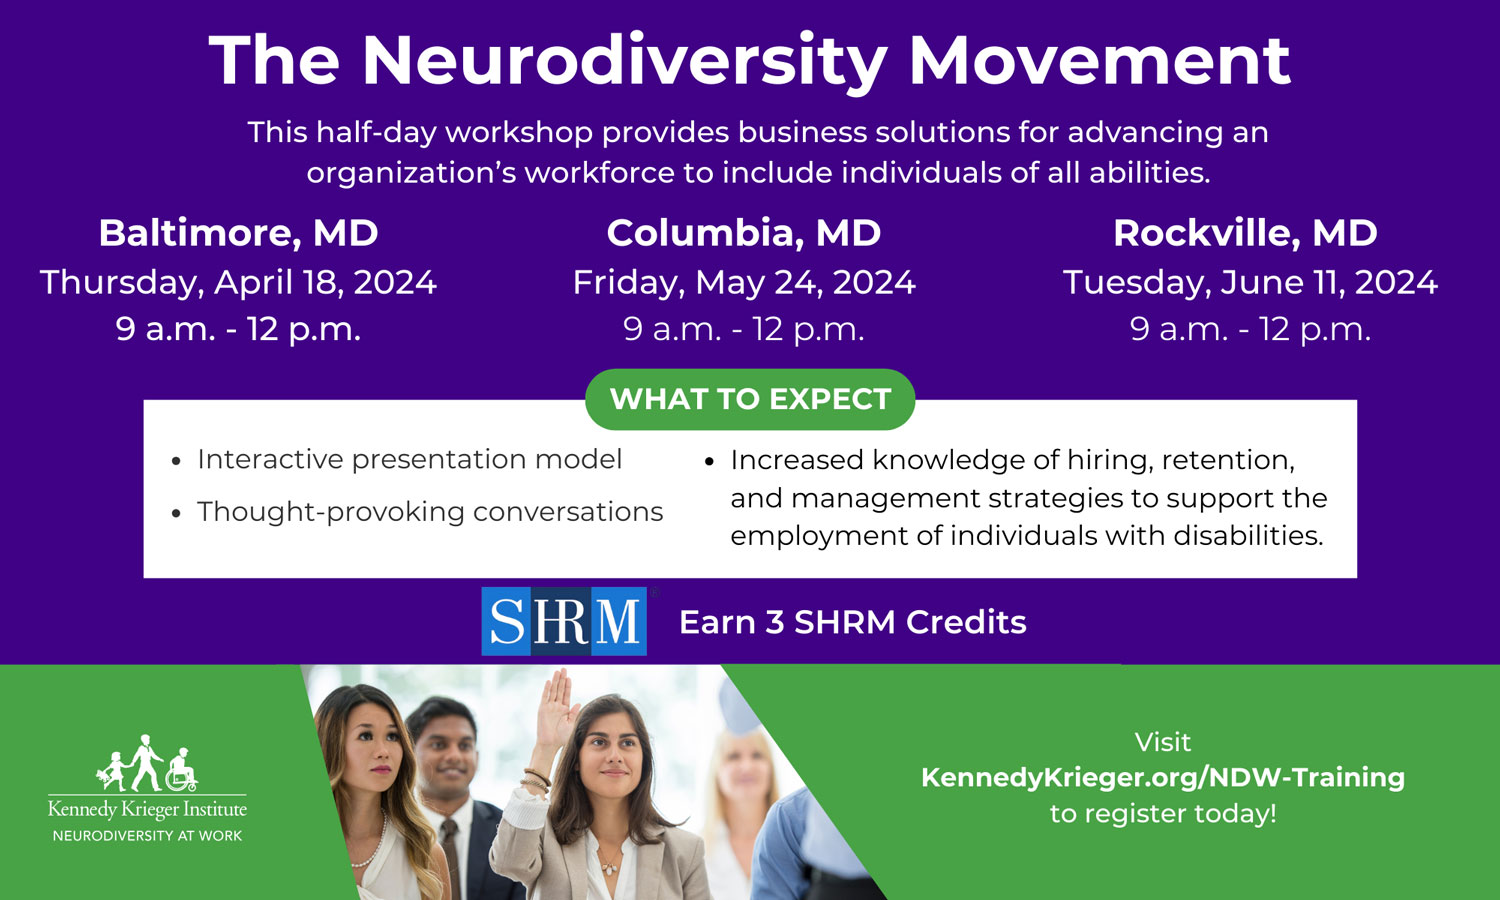 The Neurodiversity Movement. This half-day workshop provides business solutions for advancing an organization's workforce to include individuals of all abilities.